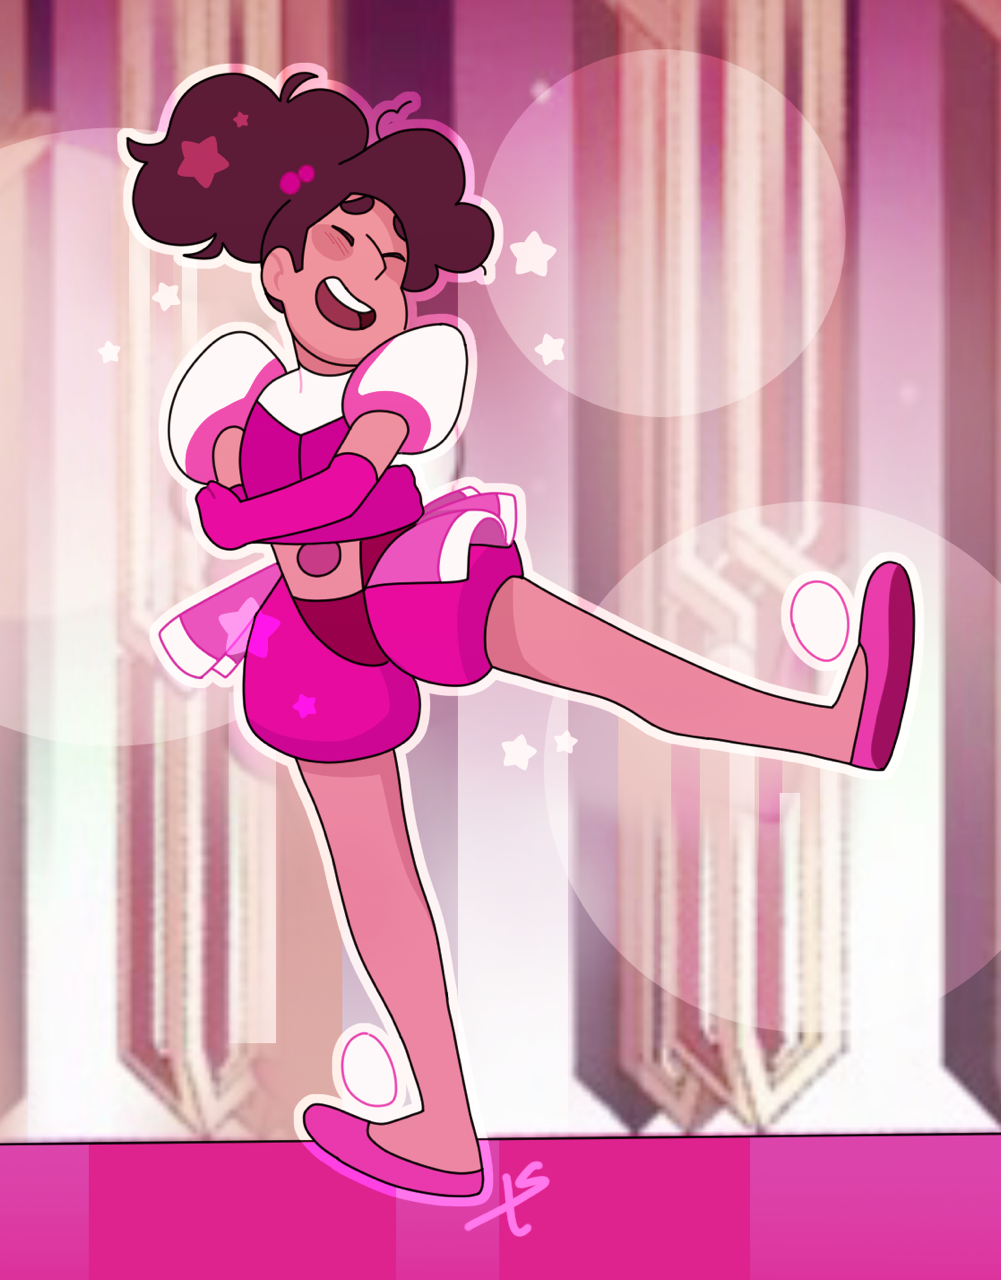 A Stevonnie redraw from today’s episode 💖 Happy 2019 everyone!!